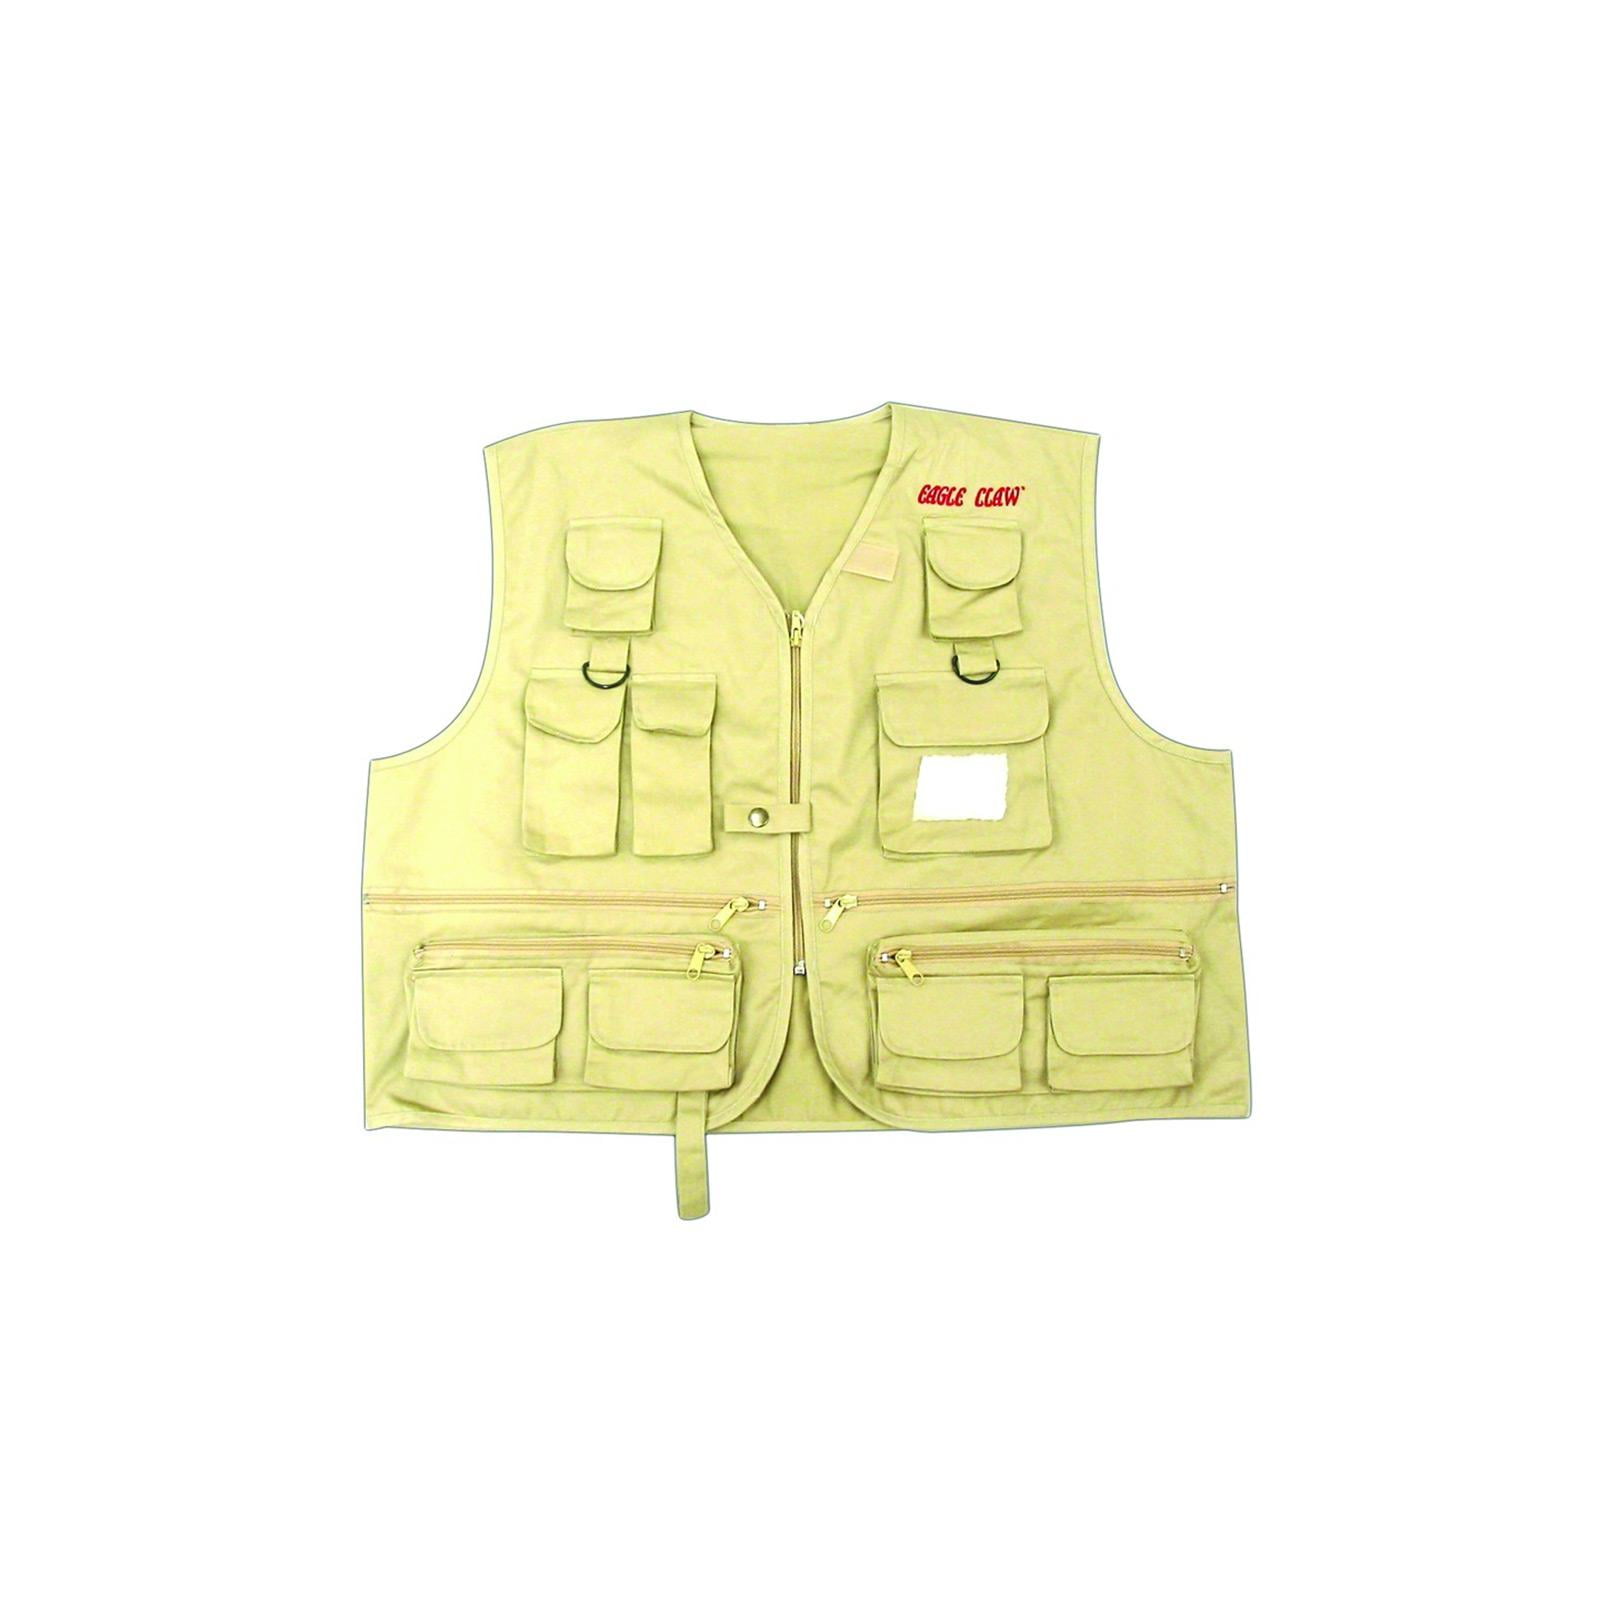 Eagle Claw Fishing Vest Adult Xlg 